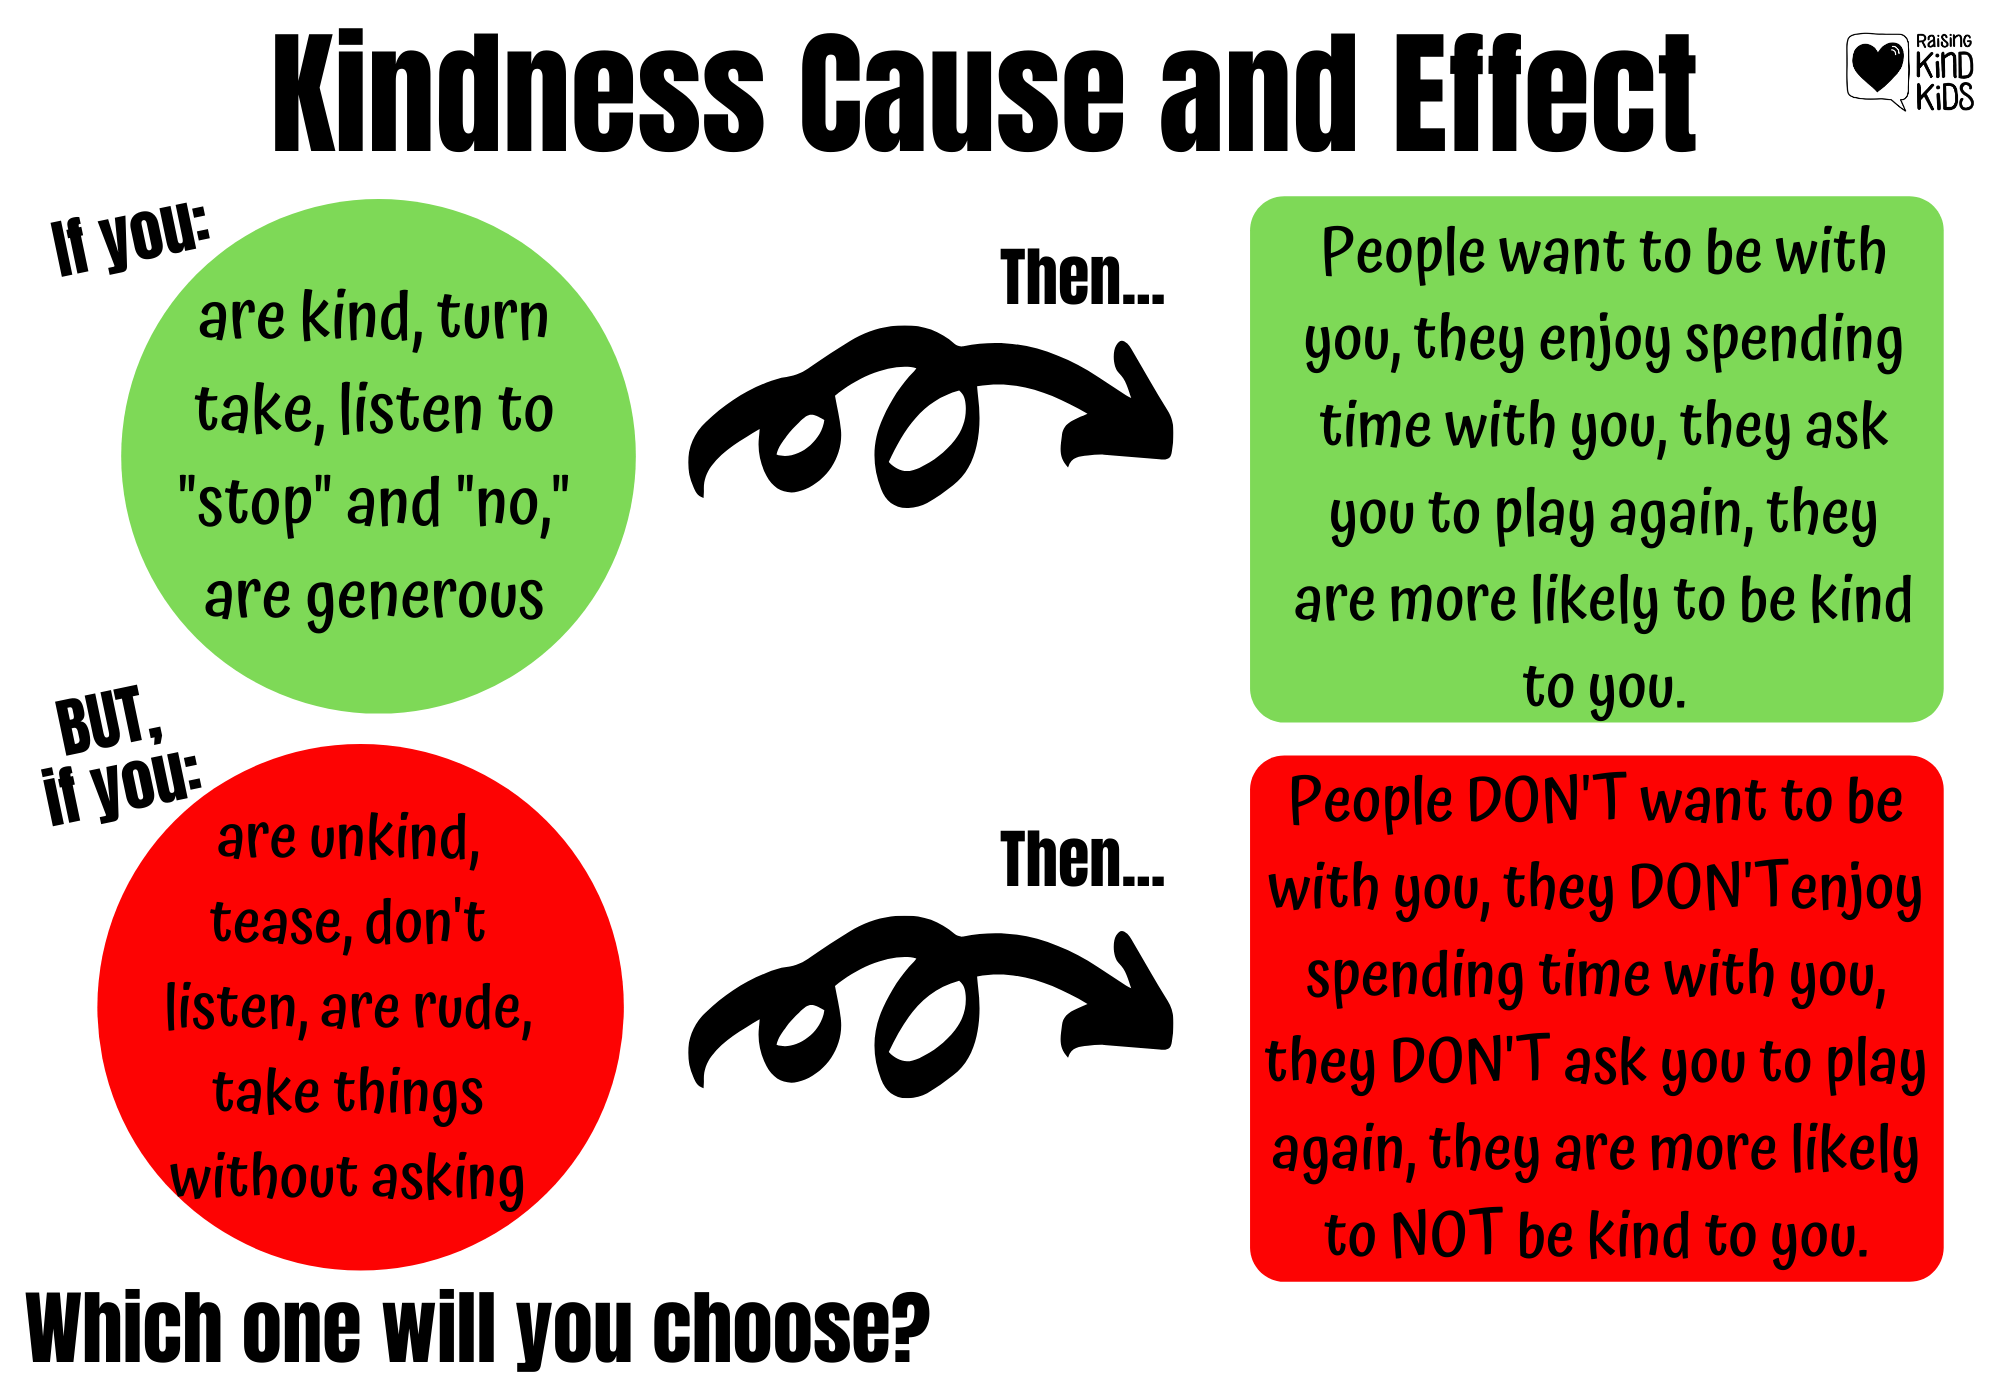 Use this kindness cause and effect resource to help kids understand how their behavior effects those around them.